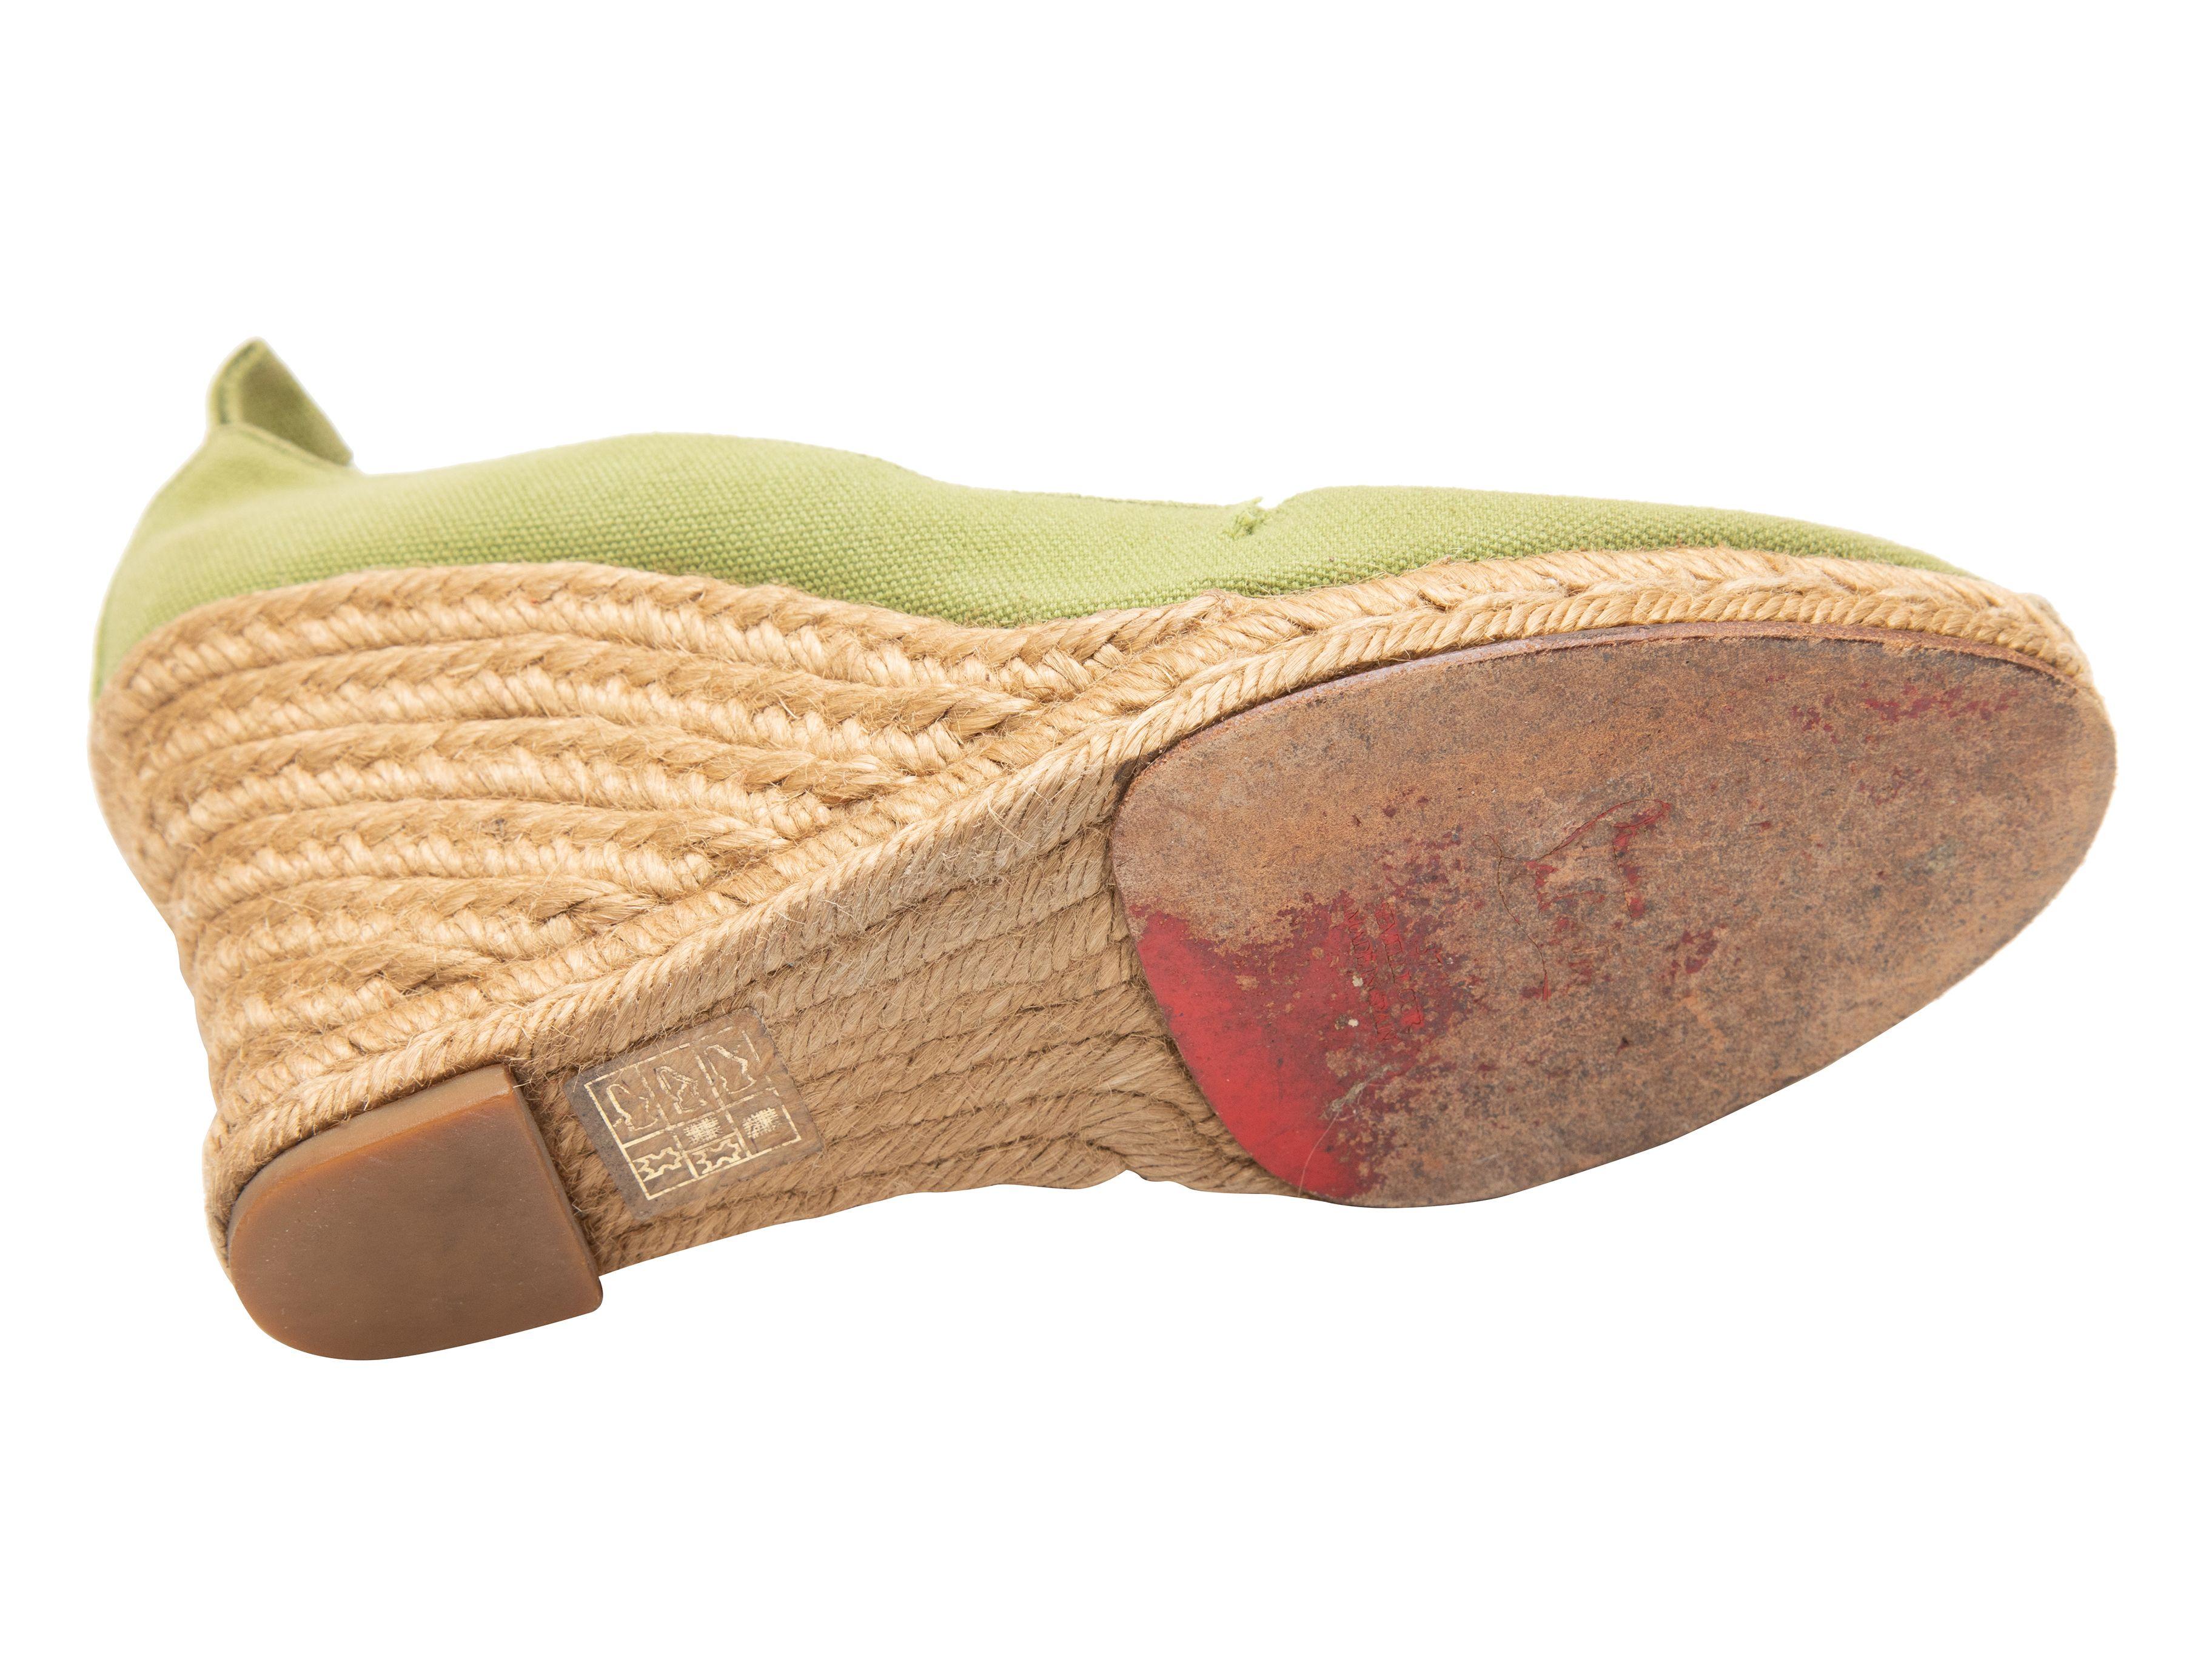 Product Details: Green and beige espadrille wedges by Christian Louboutin. Jute trim at soles. 3.5